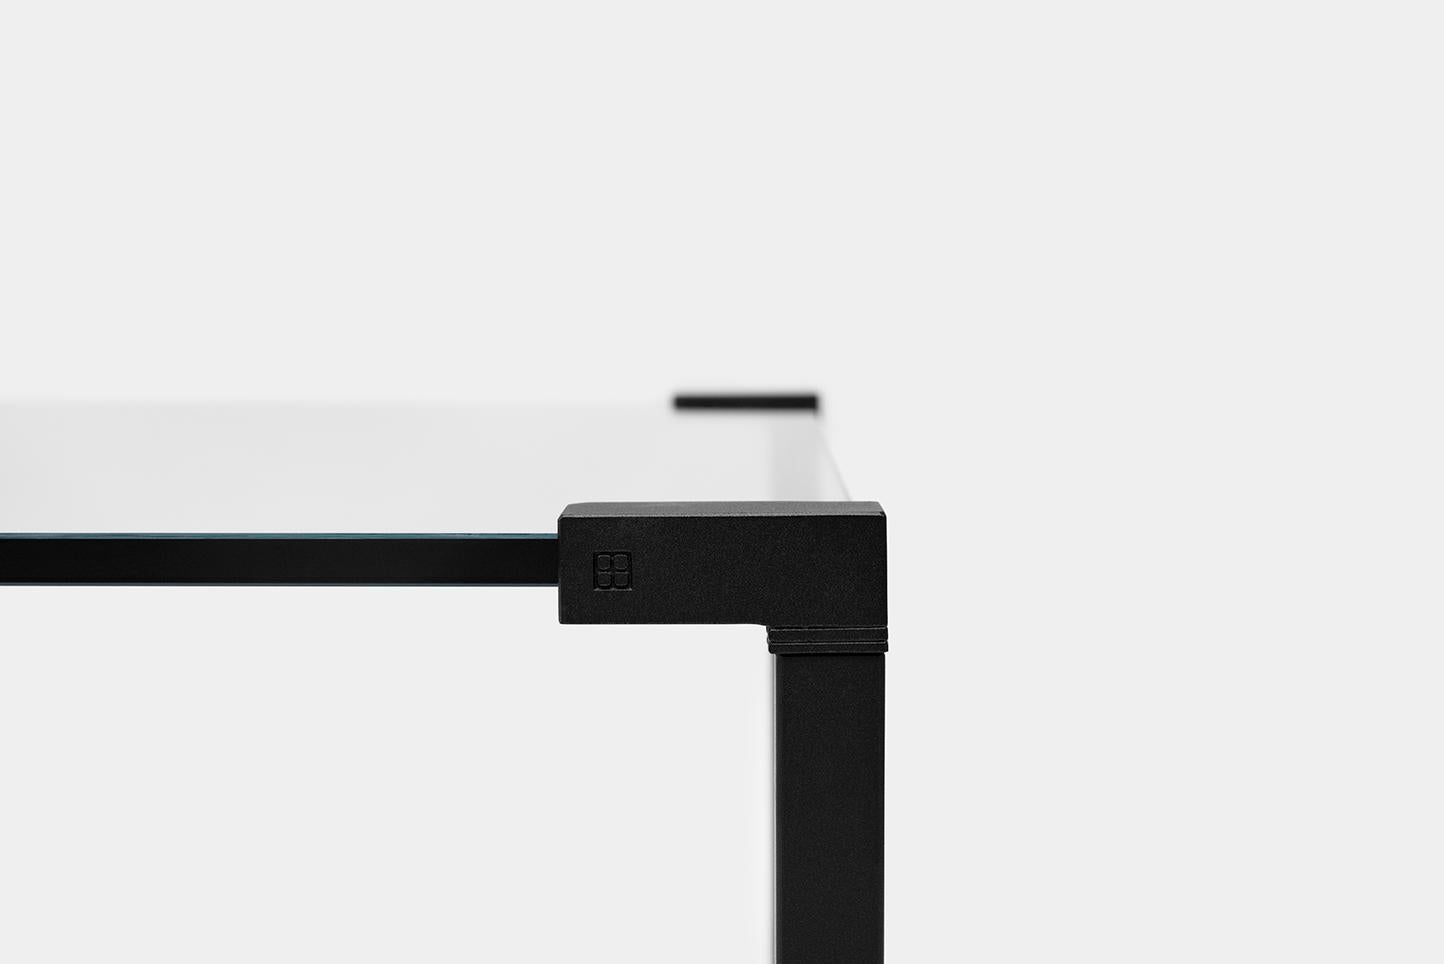 This minimalistic table by GHYCZY consists of a glass tabletop with black stainless-steel legs. The legs of the iconic table are made of tubes and casted parts which clamp the glass. On the casted parts the minimalistic GHYCZY logo is visible. The